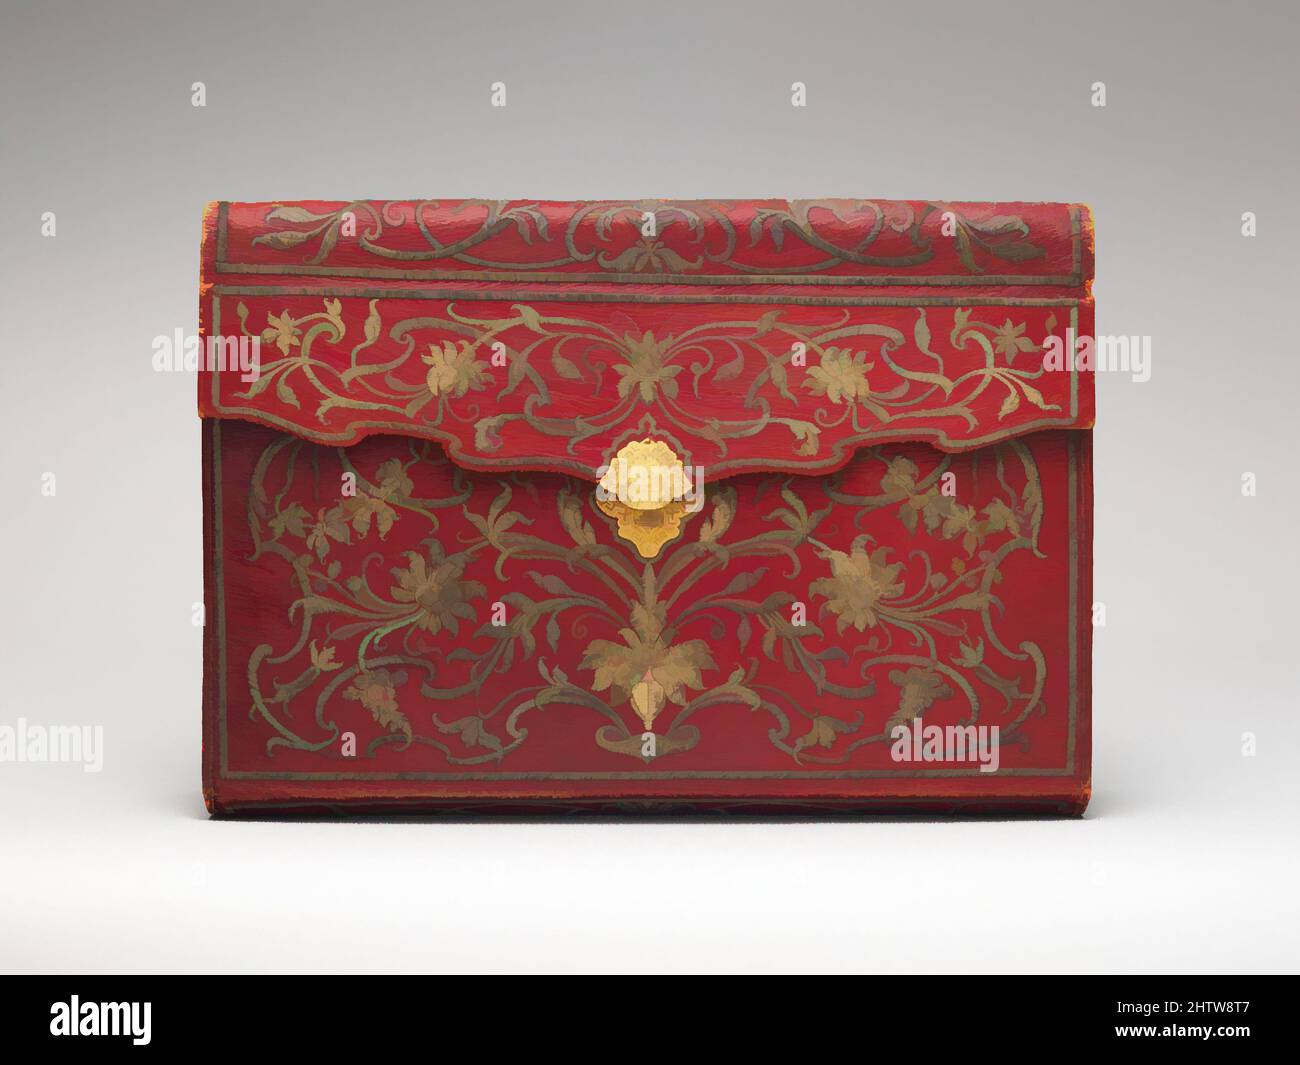 Art inspired by Briefcase (portefuille), 1763–64, Turkish and French, Red morocco leather embroidered with gold thread and silk, fitted with gold lock, lined with green silk; gold, L. 17-11/16 x W. 13-1/8 x D. 2-1/2 in. (45 x 33.3 x 6.3 cm.), Natural Substances-Leatherwork, Made in, Classic works modernized by Artotop with a splash of modernity. Shapes, color and value, eye-catching visual impact on art. Emotions through freedom of artworks in a contemporary way. A timeless message pursuing a wildly creative new direction. Artists turning to the digital medium and creating the Artotop NFT Stock Photo